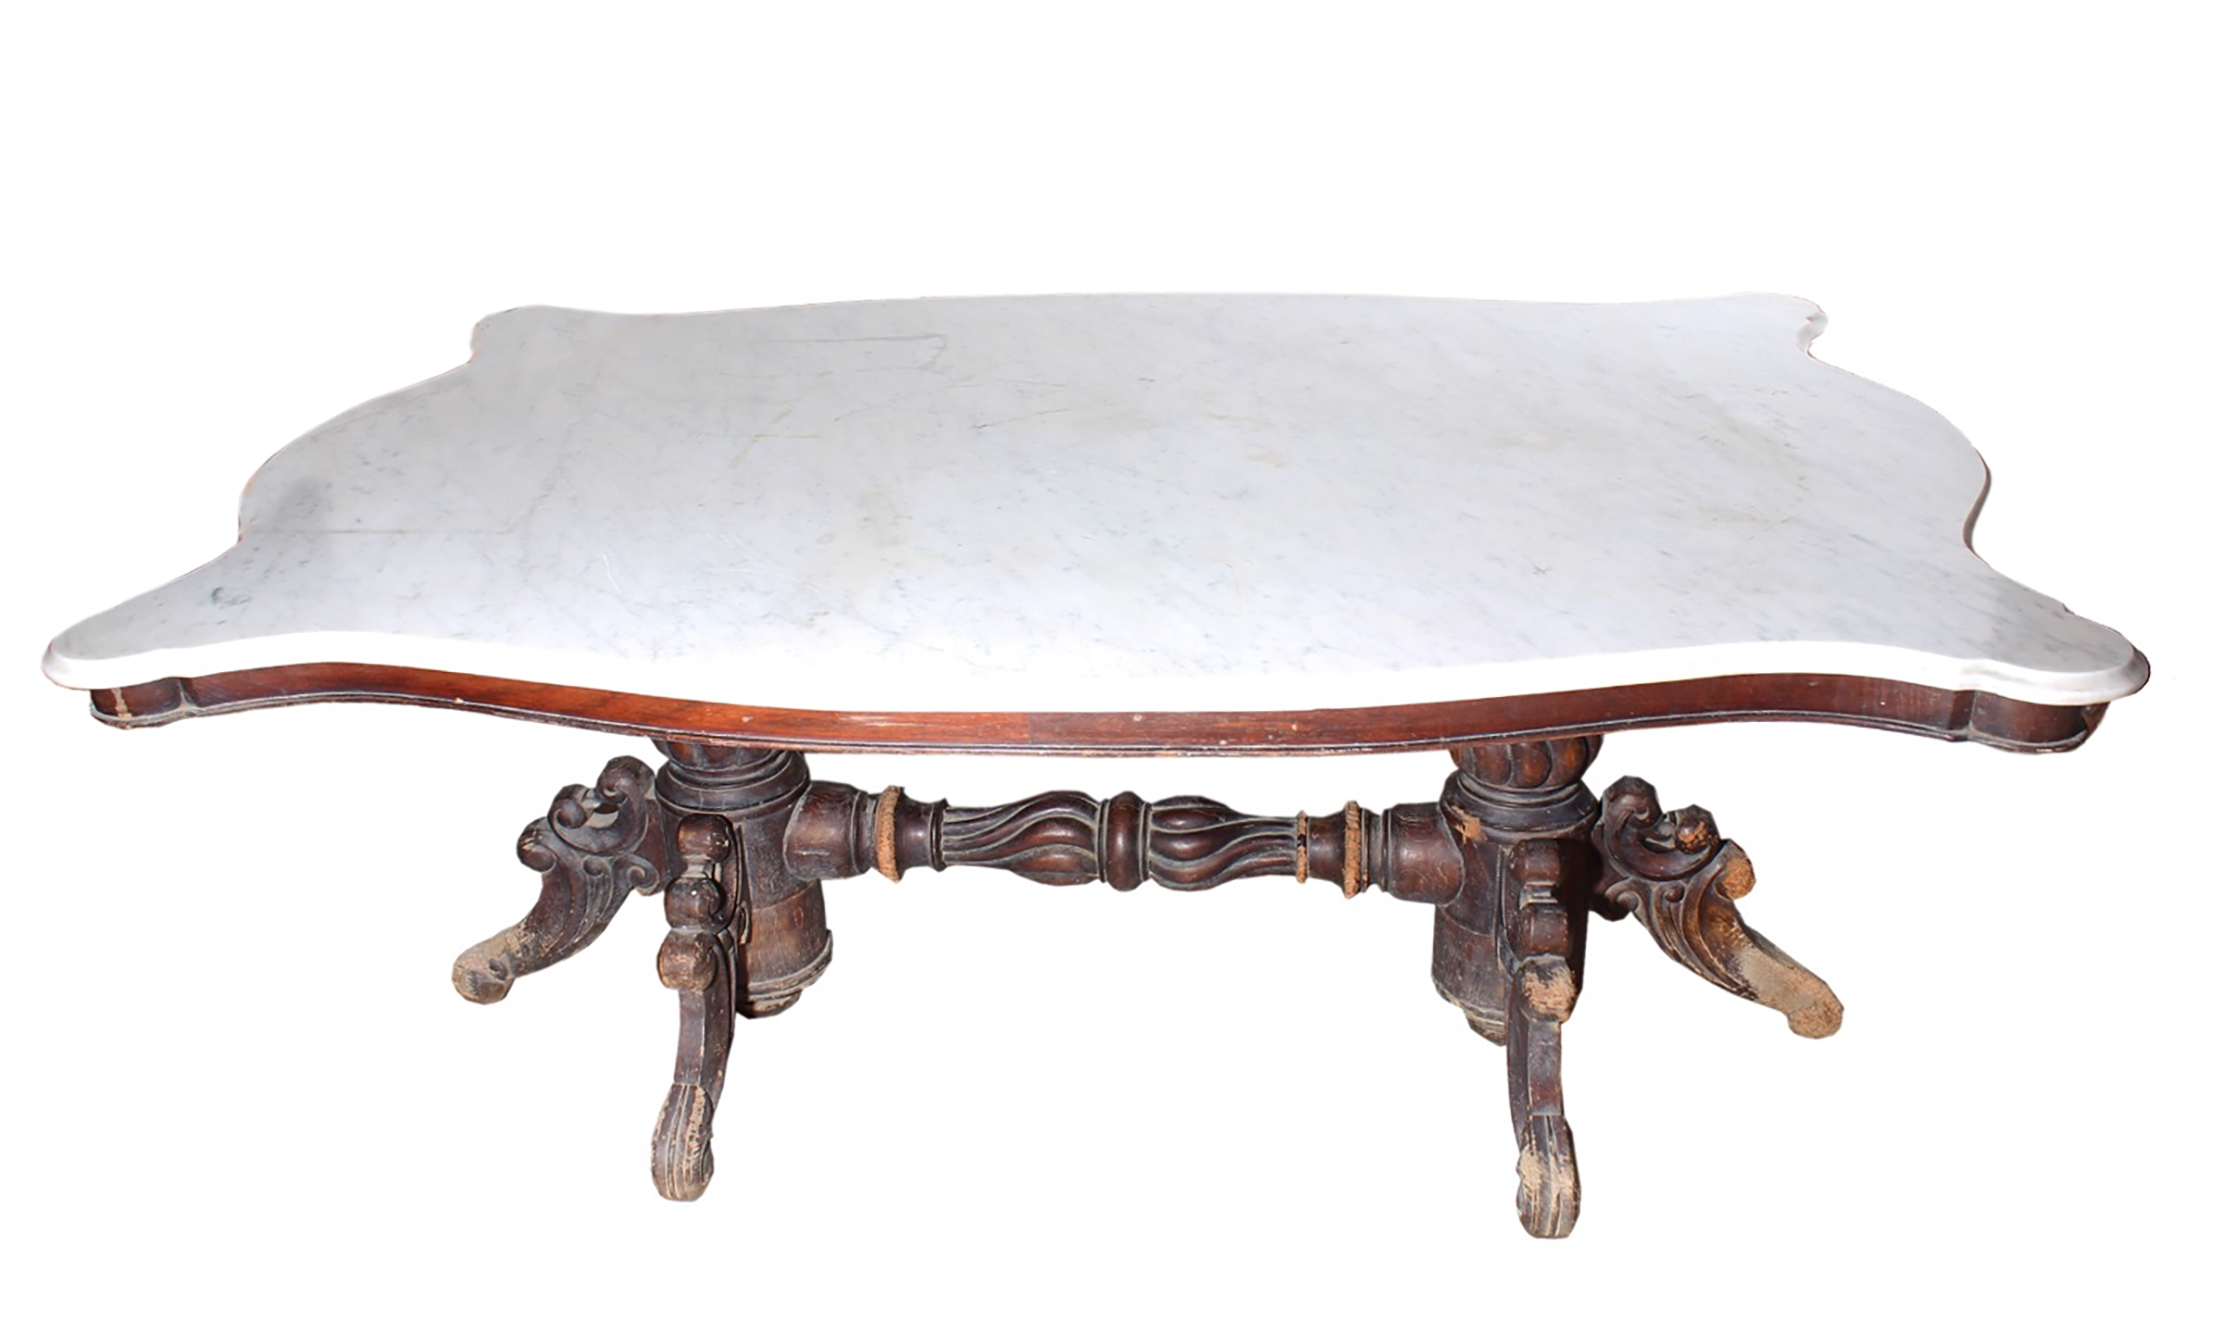 A 20th century carved teak table with marble top in the form of tortoise